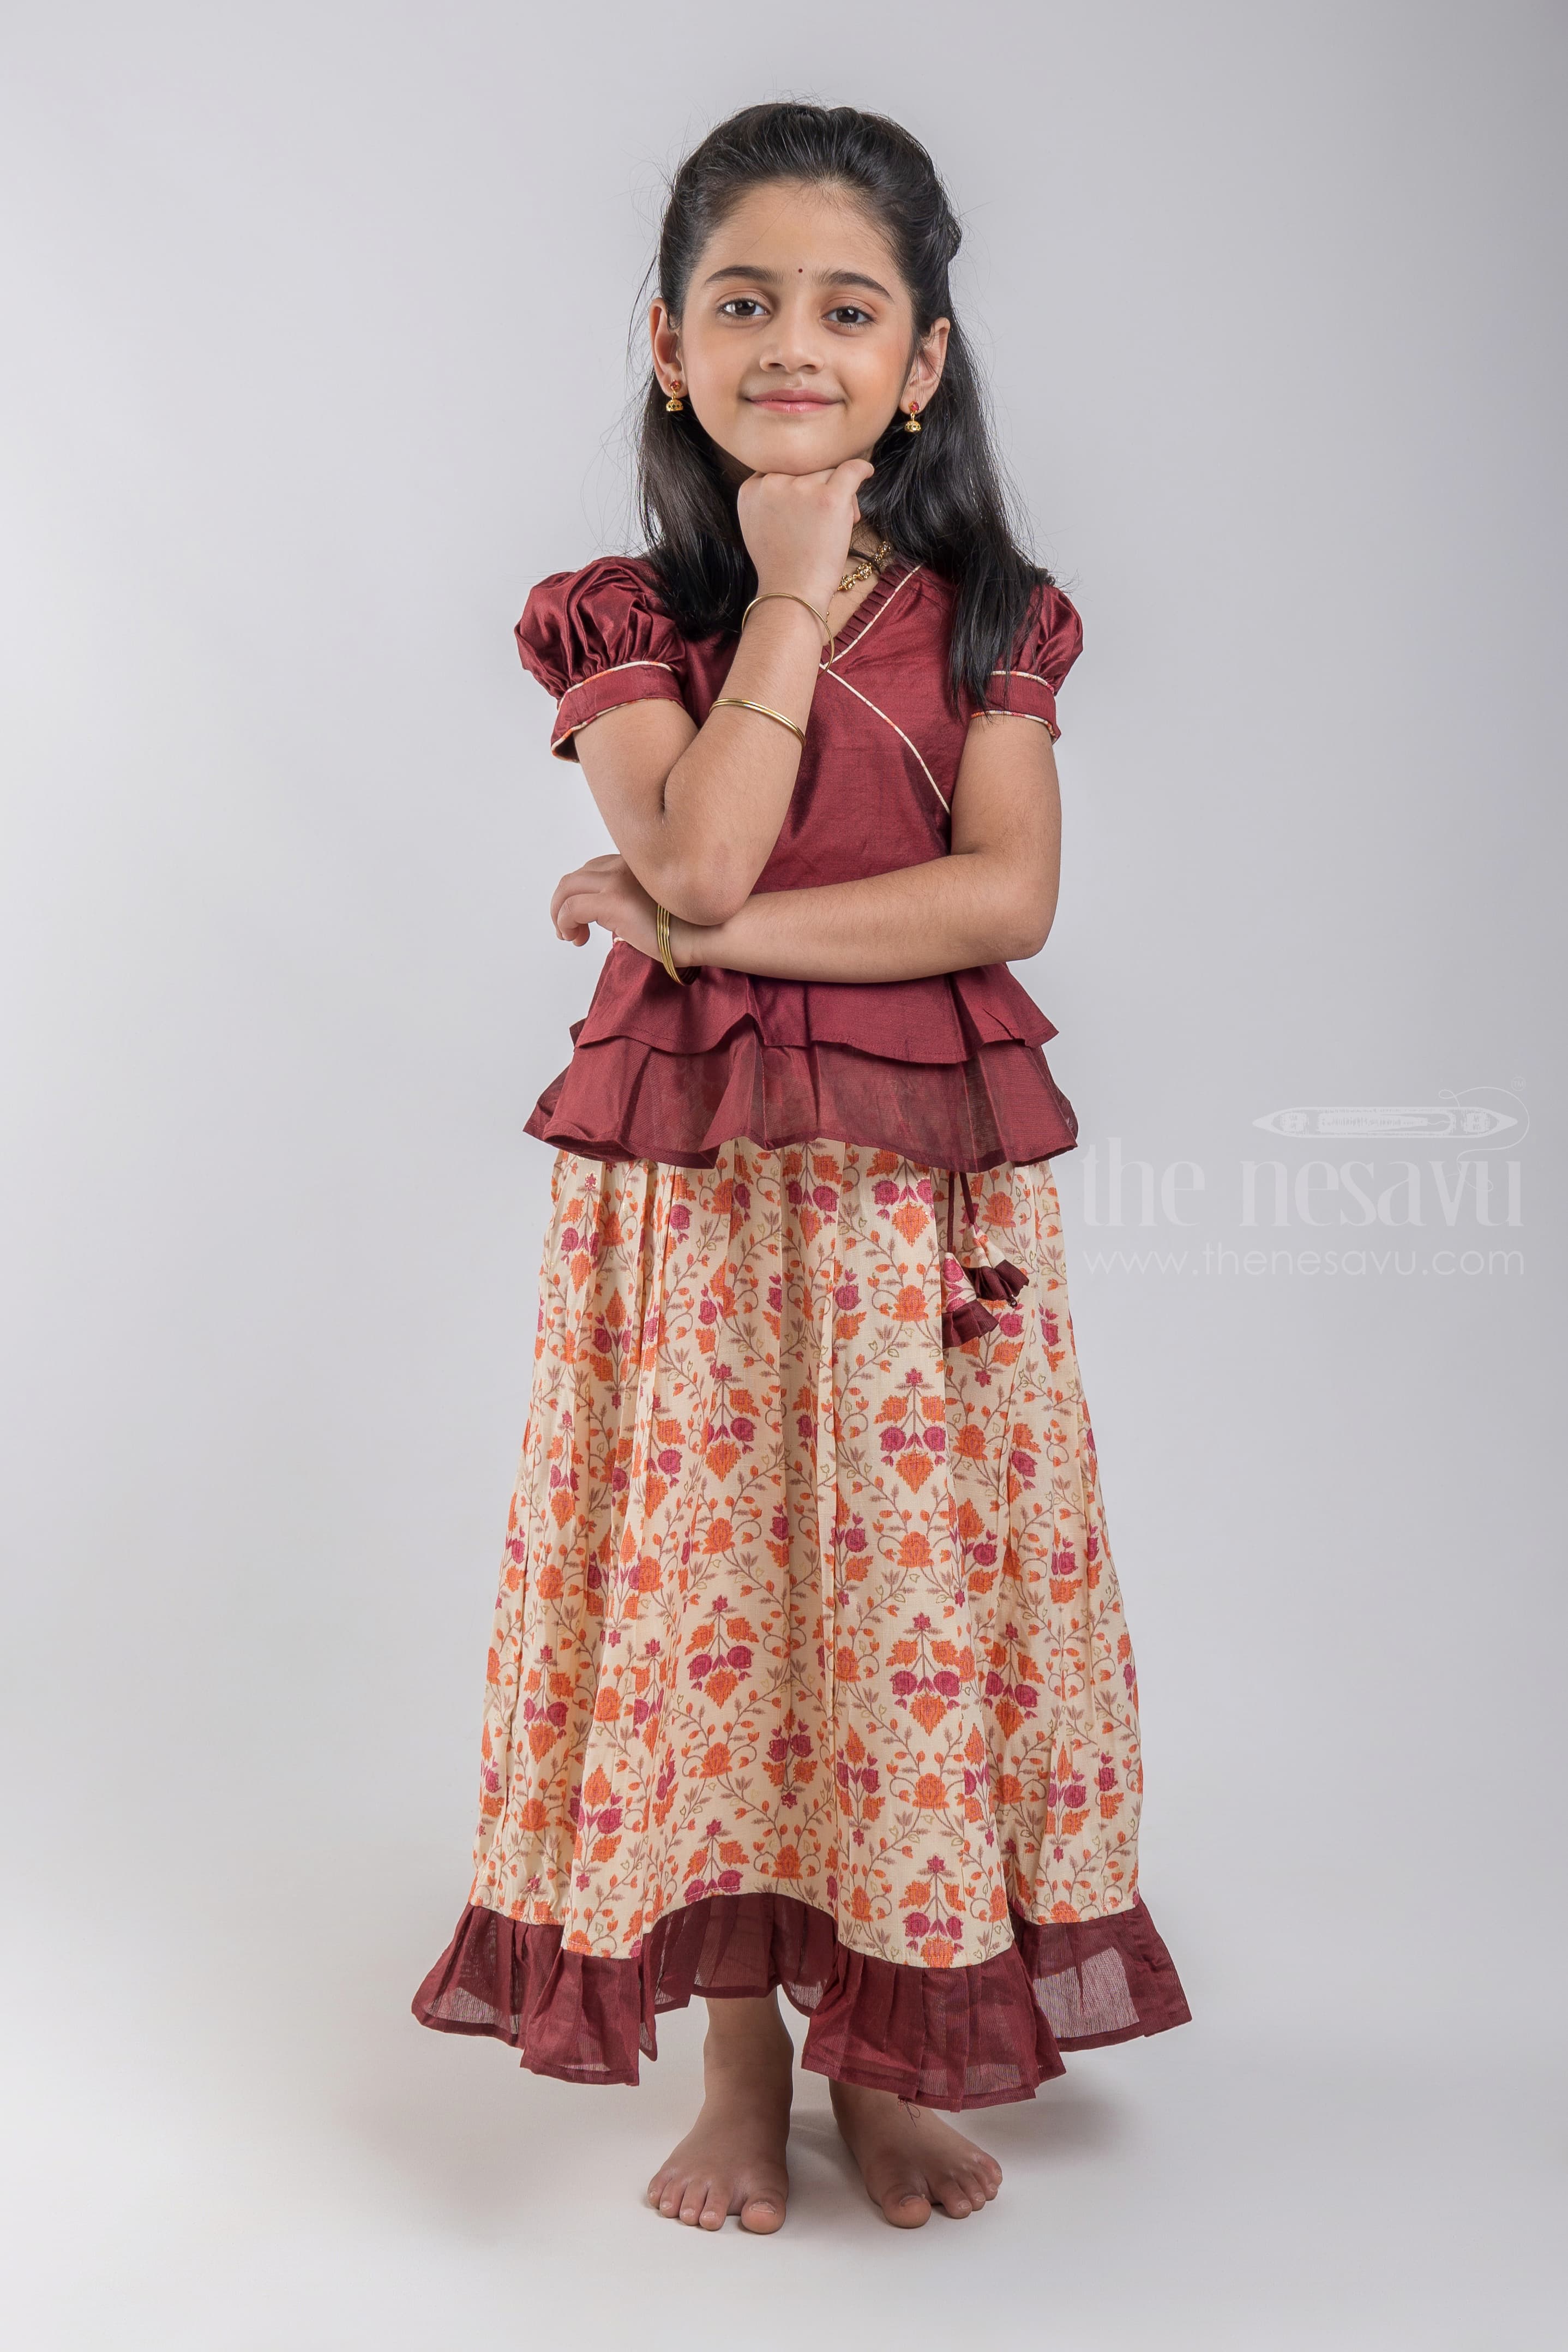 These Pattu Pavadai Choices Are Perfect For Your Tiny Tots This Wedding  Season | Dresses kids girl, Kids blouse designs, Kids designer dresses